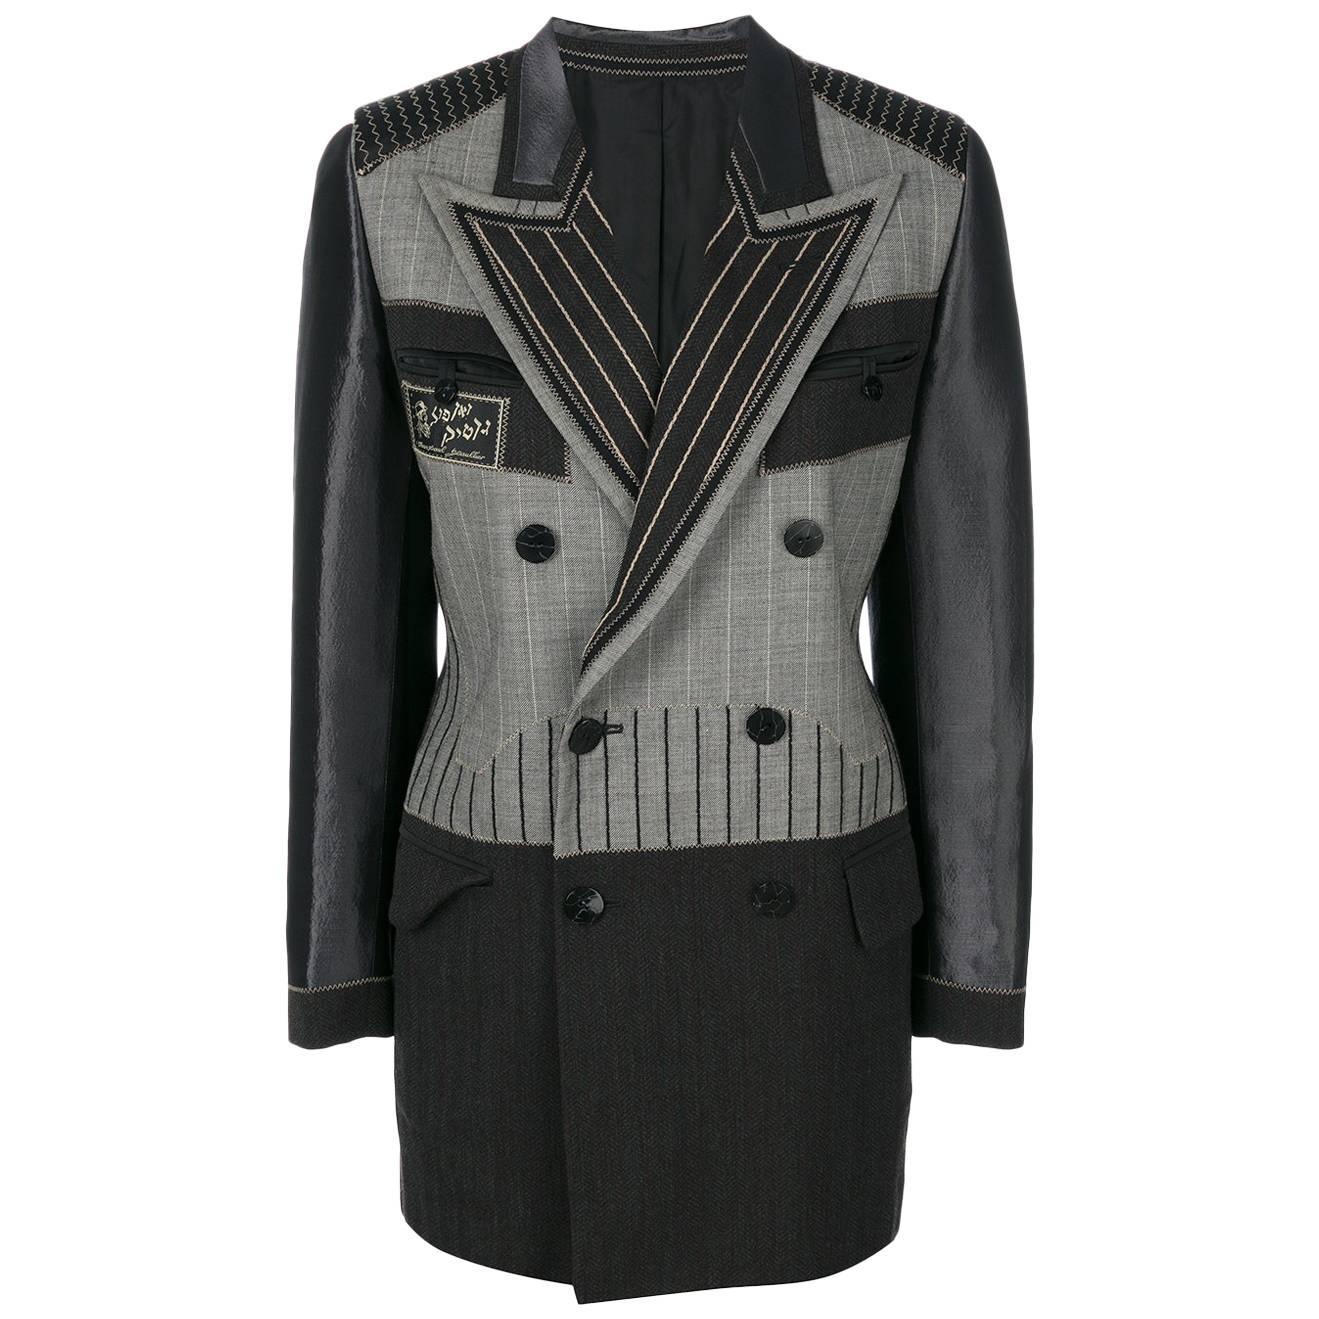 "Les rabbins chic"  1993 JEAN PAUL GAULTIER   double-breasted tailored jacket   For Sale